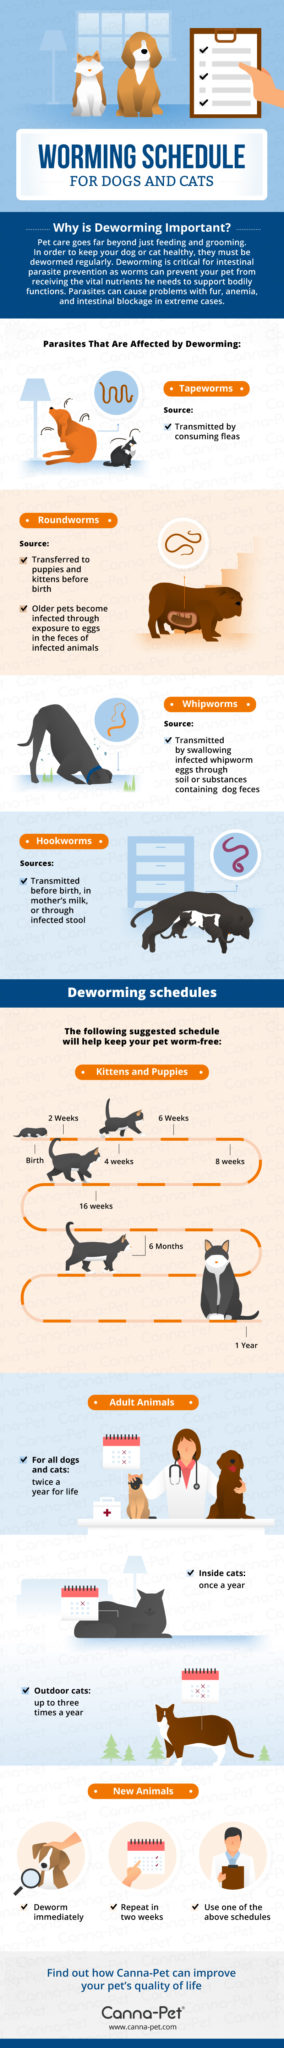 Worming Schedules for Cats & Dogs | Canna-Pet